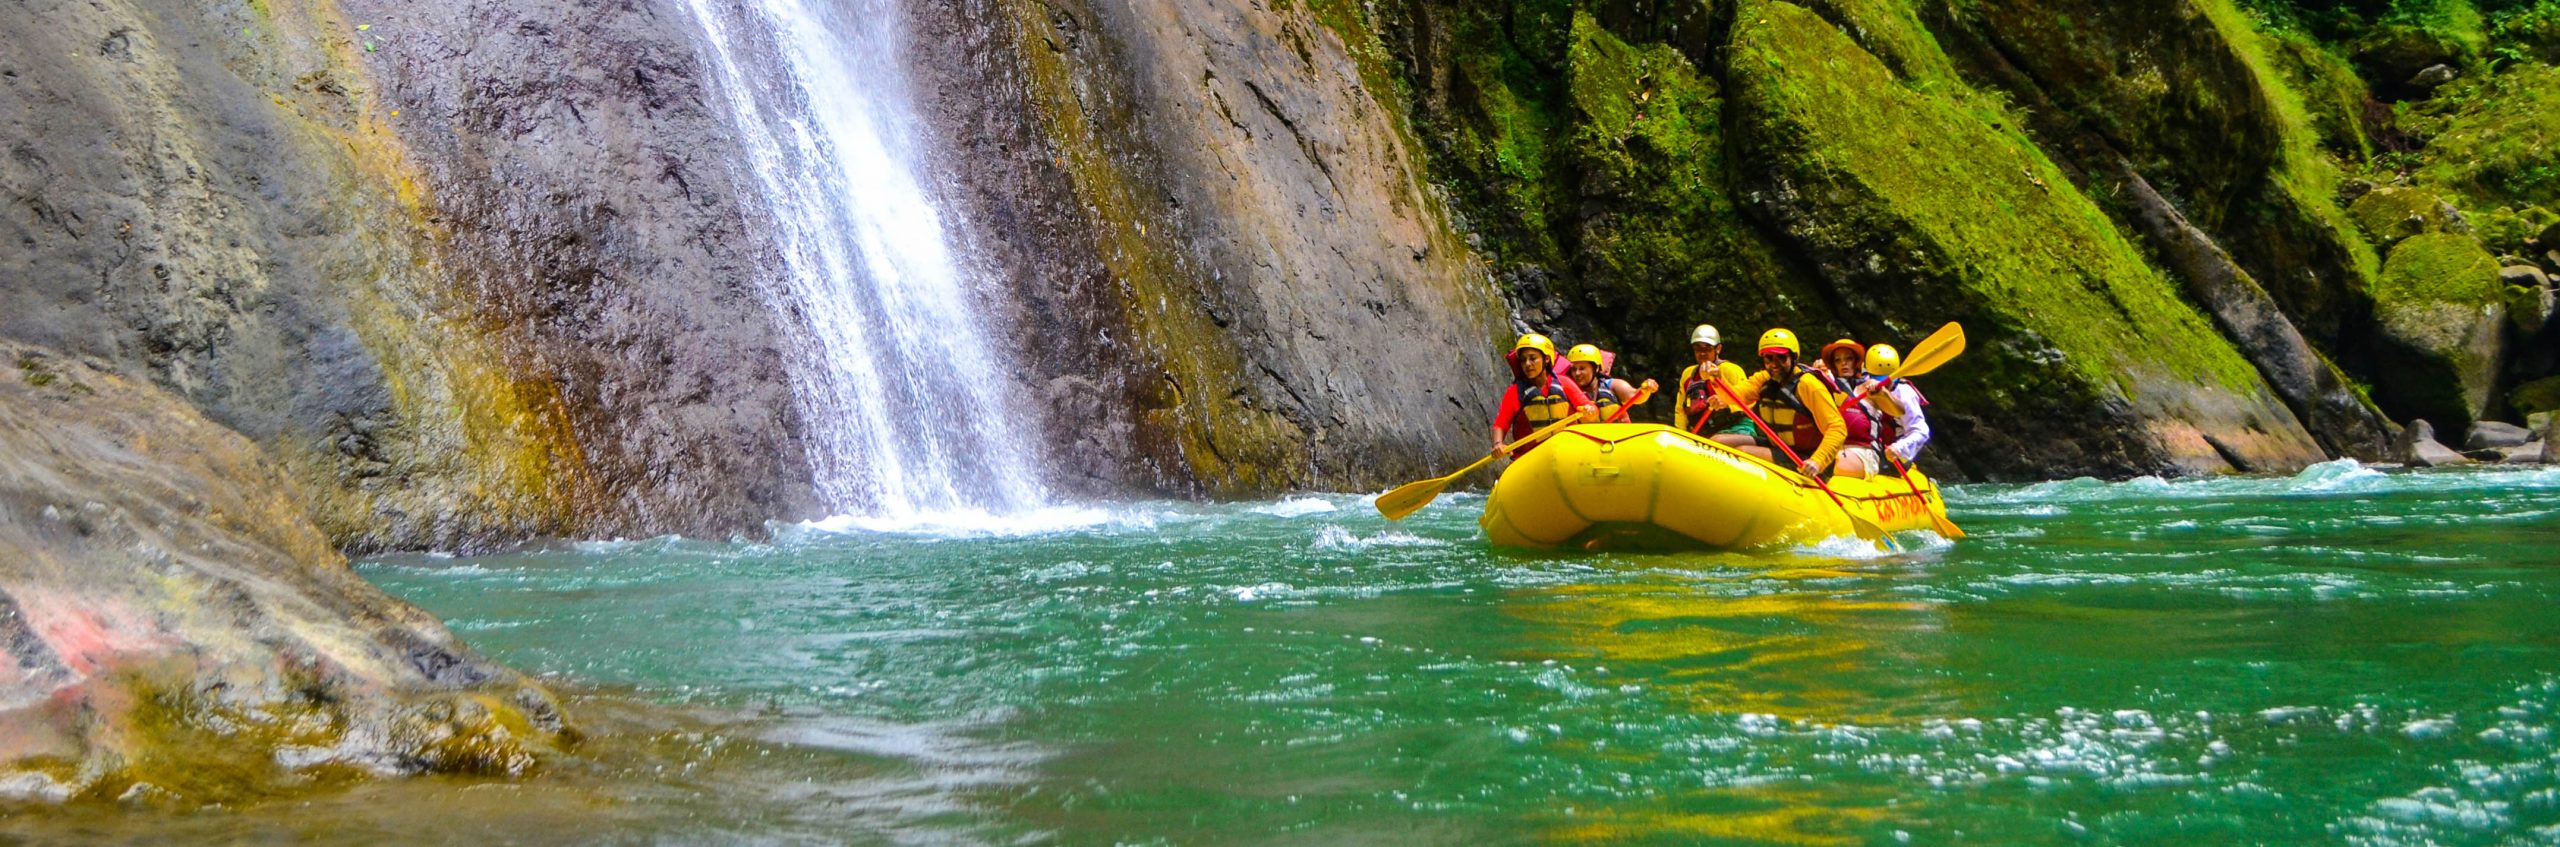 Costa Rica White Water Rafting River Tours